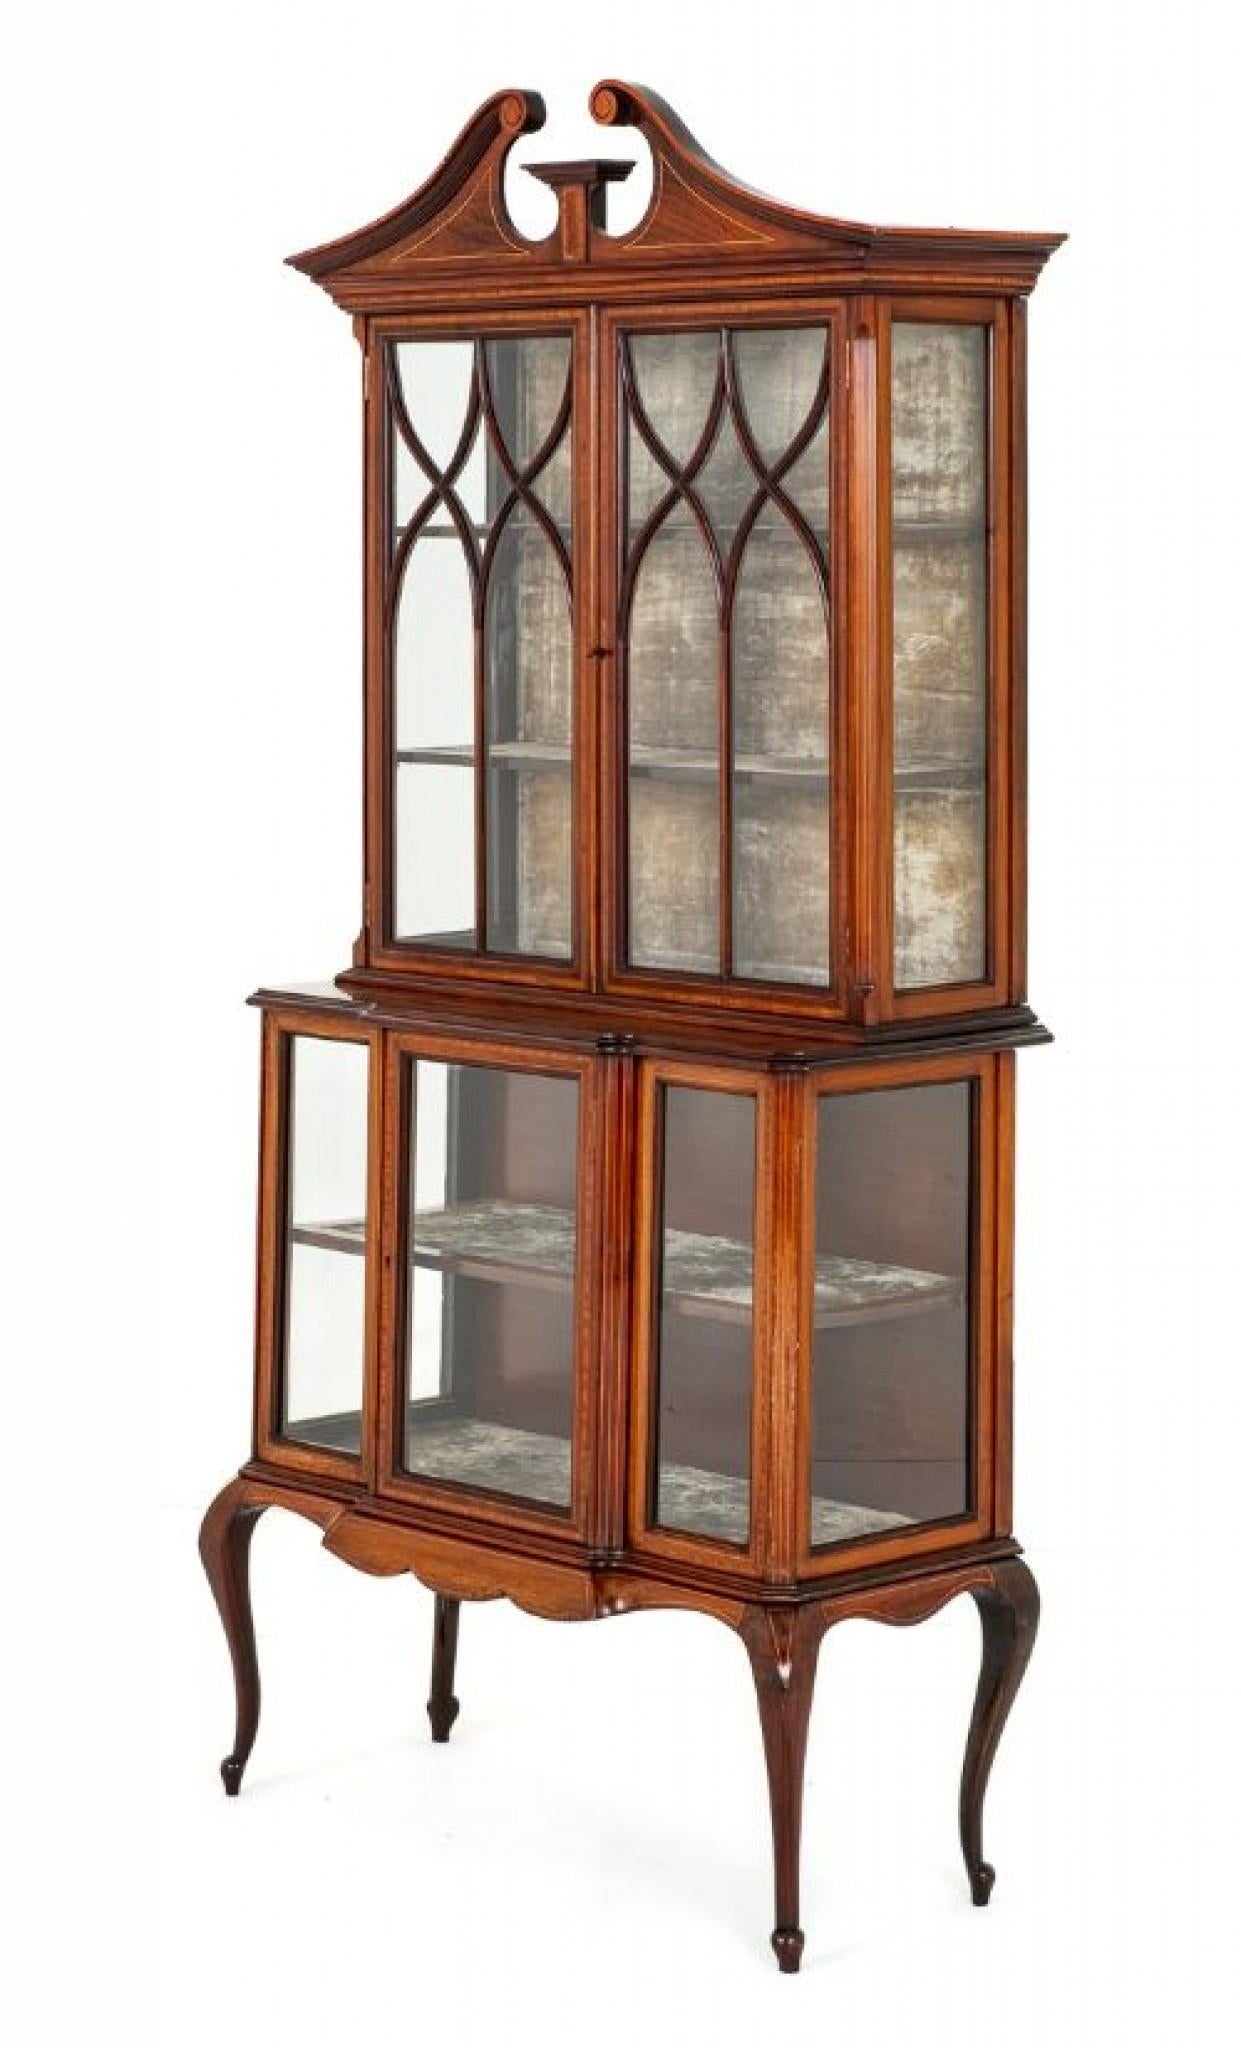 Sheraton Revival Mahogany Display Cabinet.
Circa 1890
This Elegant Cabinet Stands Upon Cabriole Legs With a Shaped Frieze.
The Lower Section Being of a Breakfront Form with 1 Door and Glazed Panels.
The Upper Section Having Astragal Glazing to the